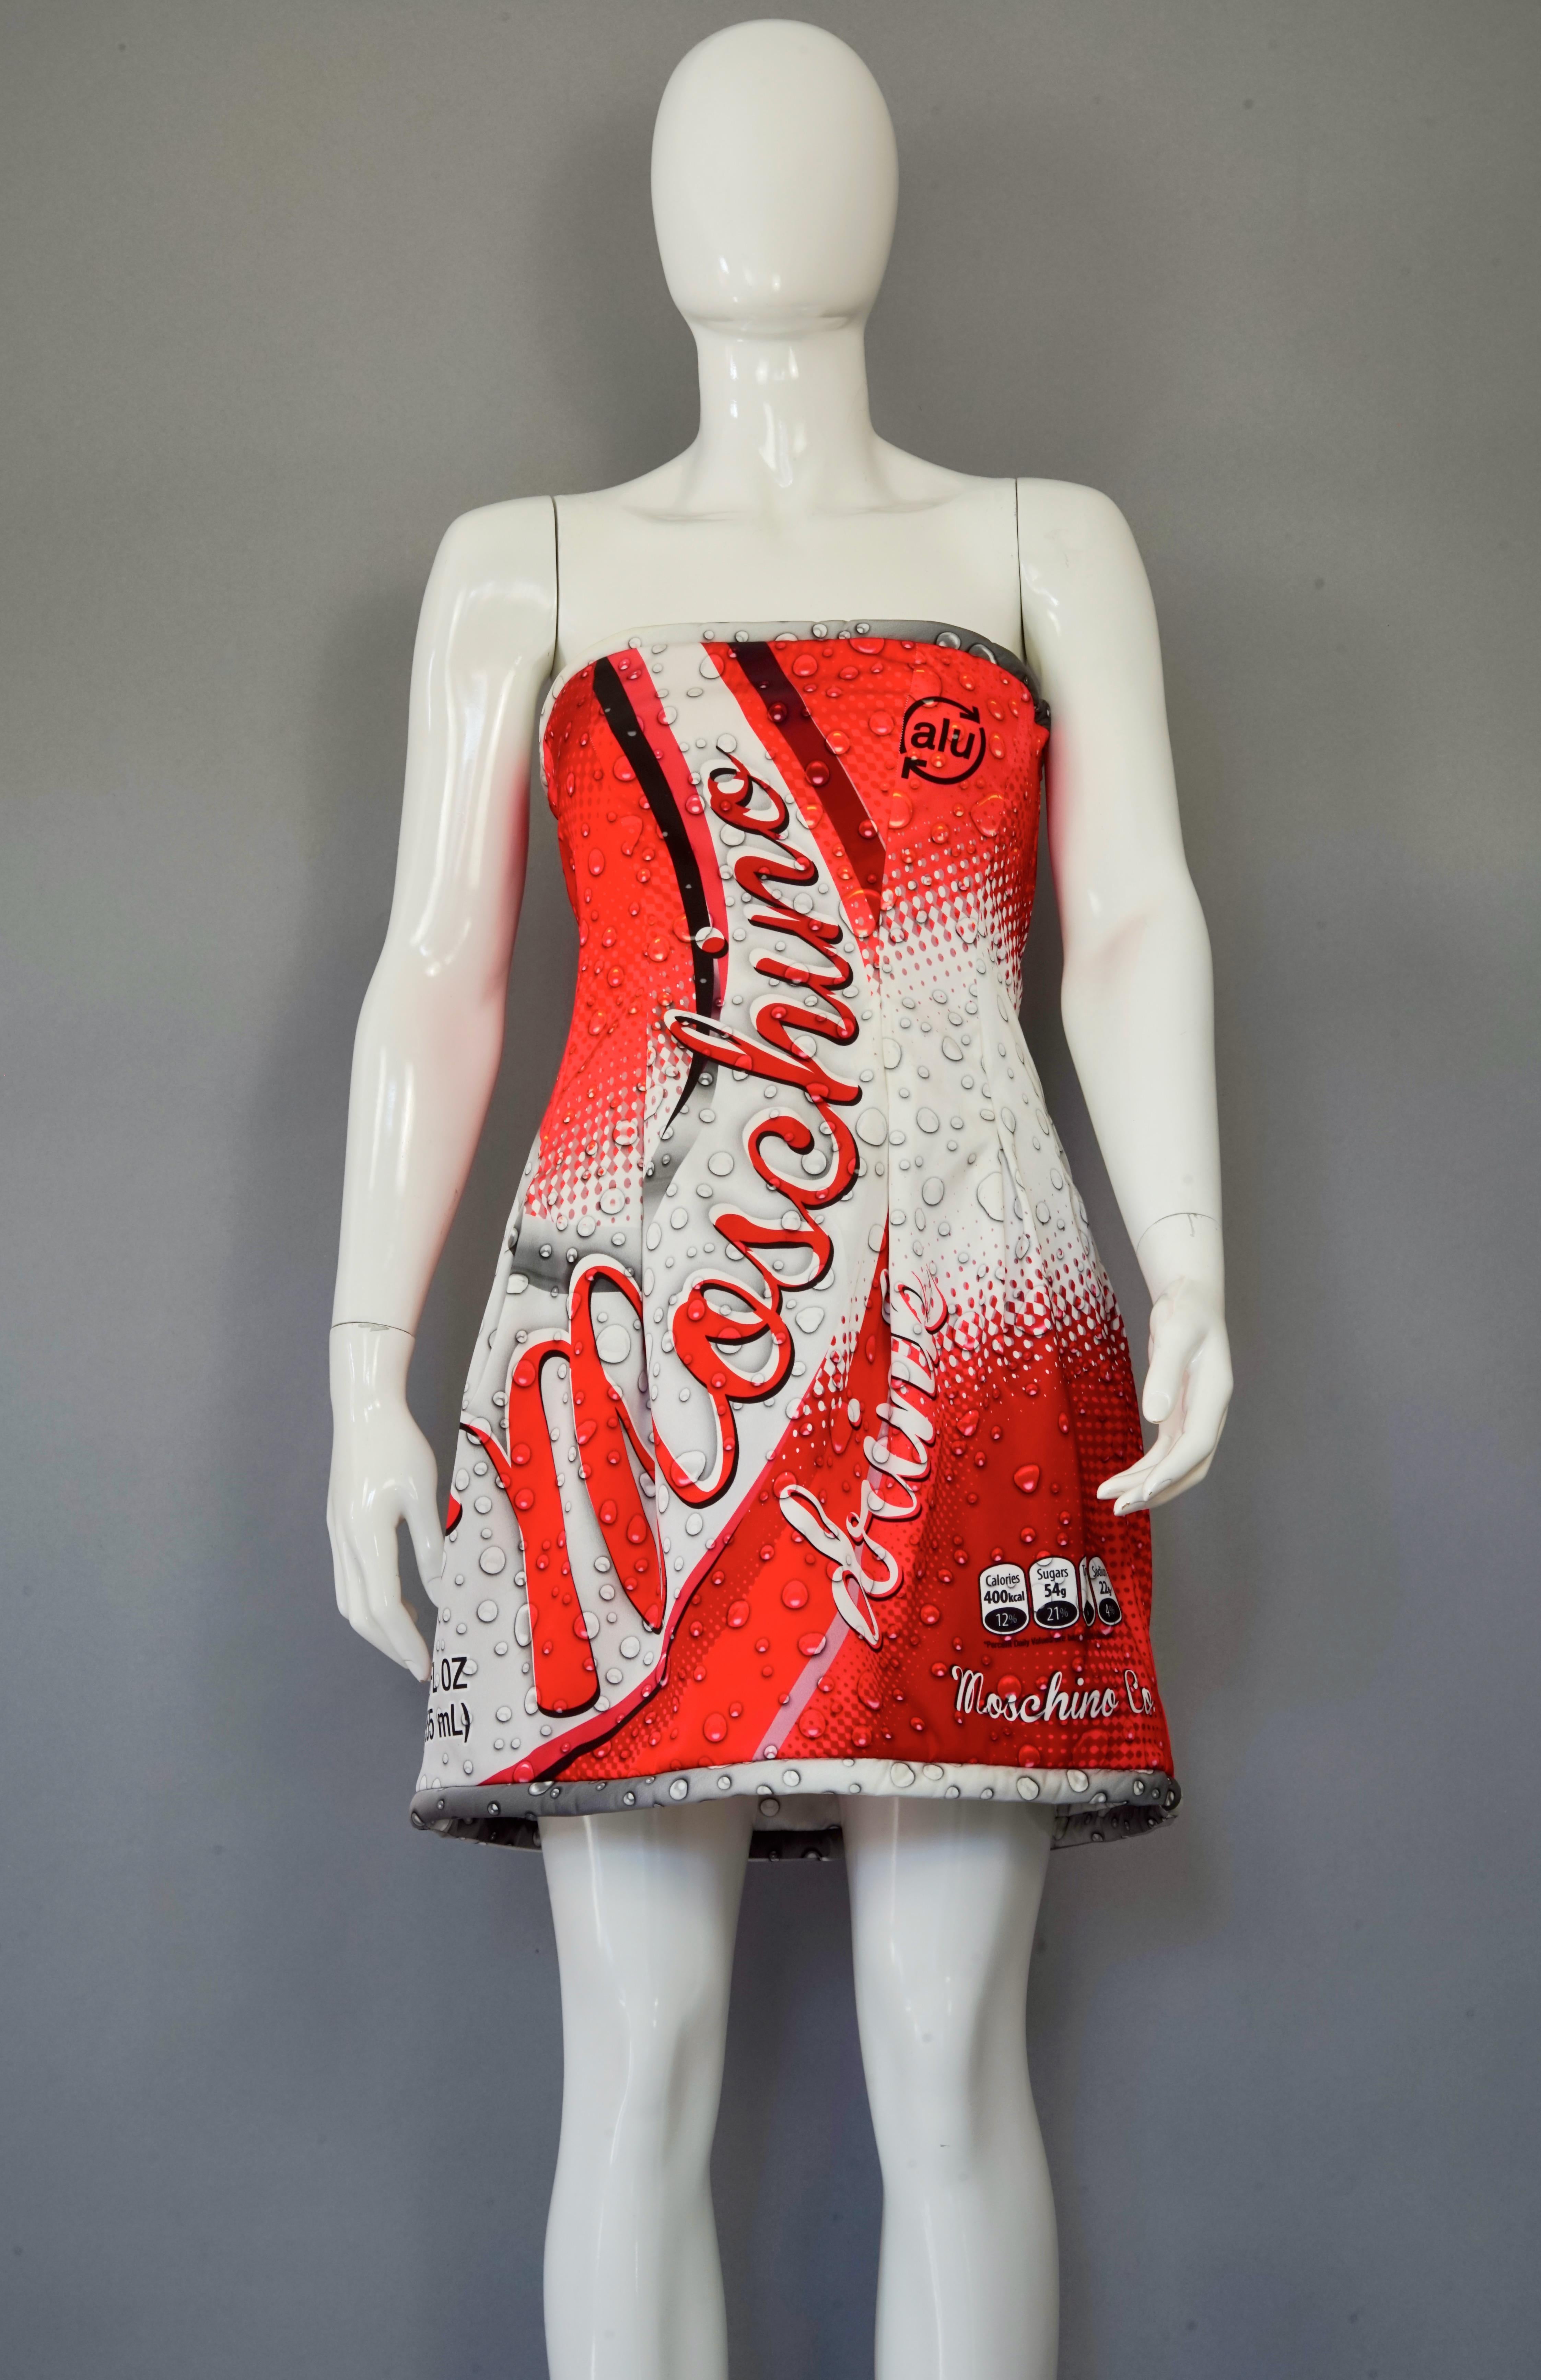 MOSCHINO COUTURE Cola Bustier Dress

Measurements taken laid flat, please double bust, waist and hips:
Bust: 16.53 inches (42 cm)
Waist: 14.96 inches (38 cm)
Hips: 19.68 inches (50 cm)
Length: 22.04 inches (56 cm) 

Features:
- 100% Authentic